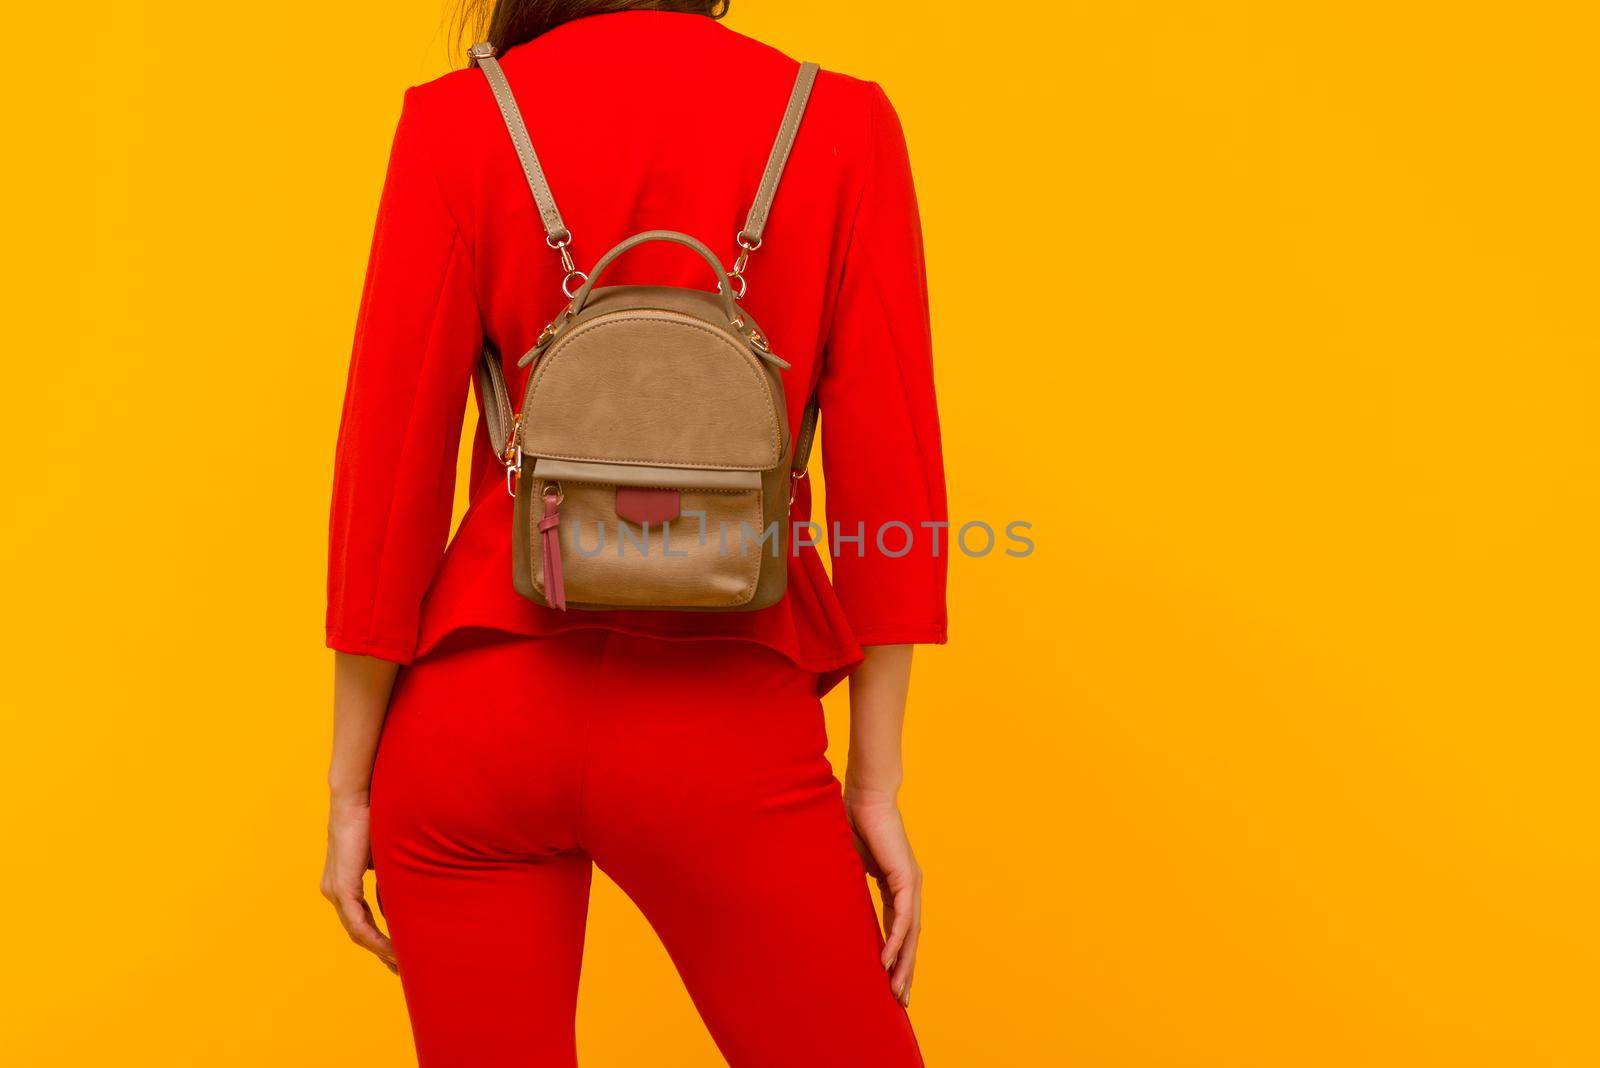 Young girl in a red suit with a small backpack on a yellow background by zartarn